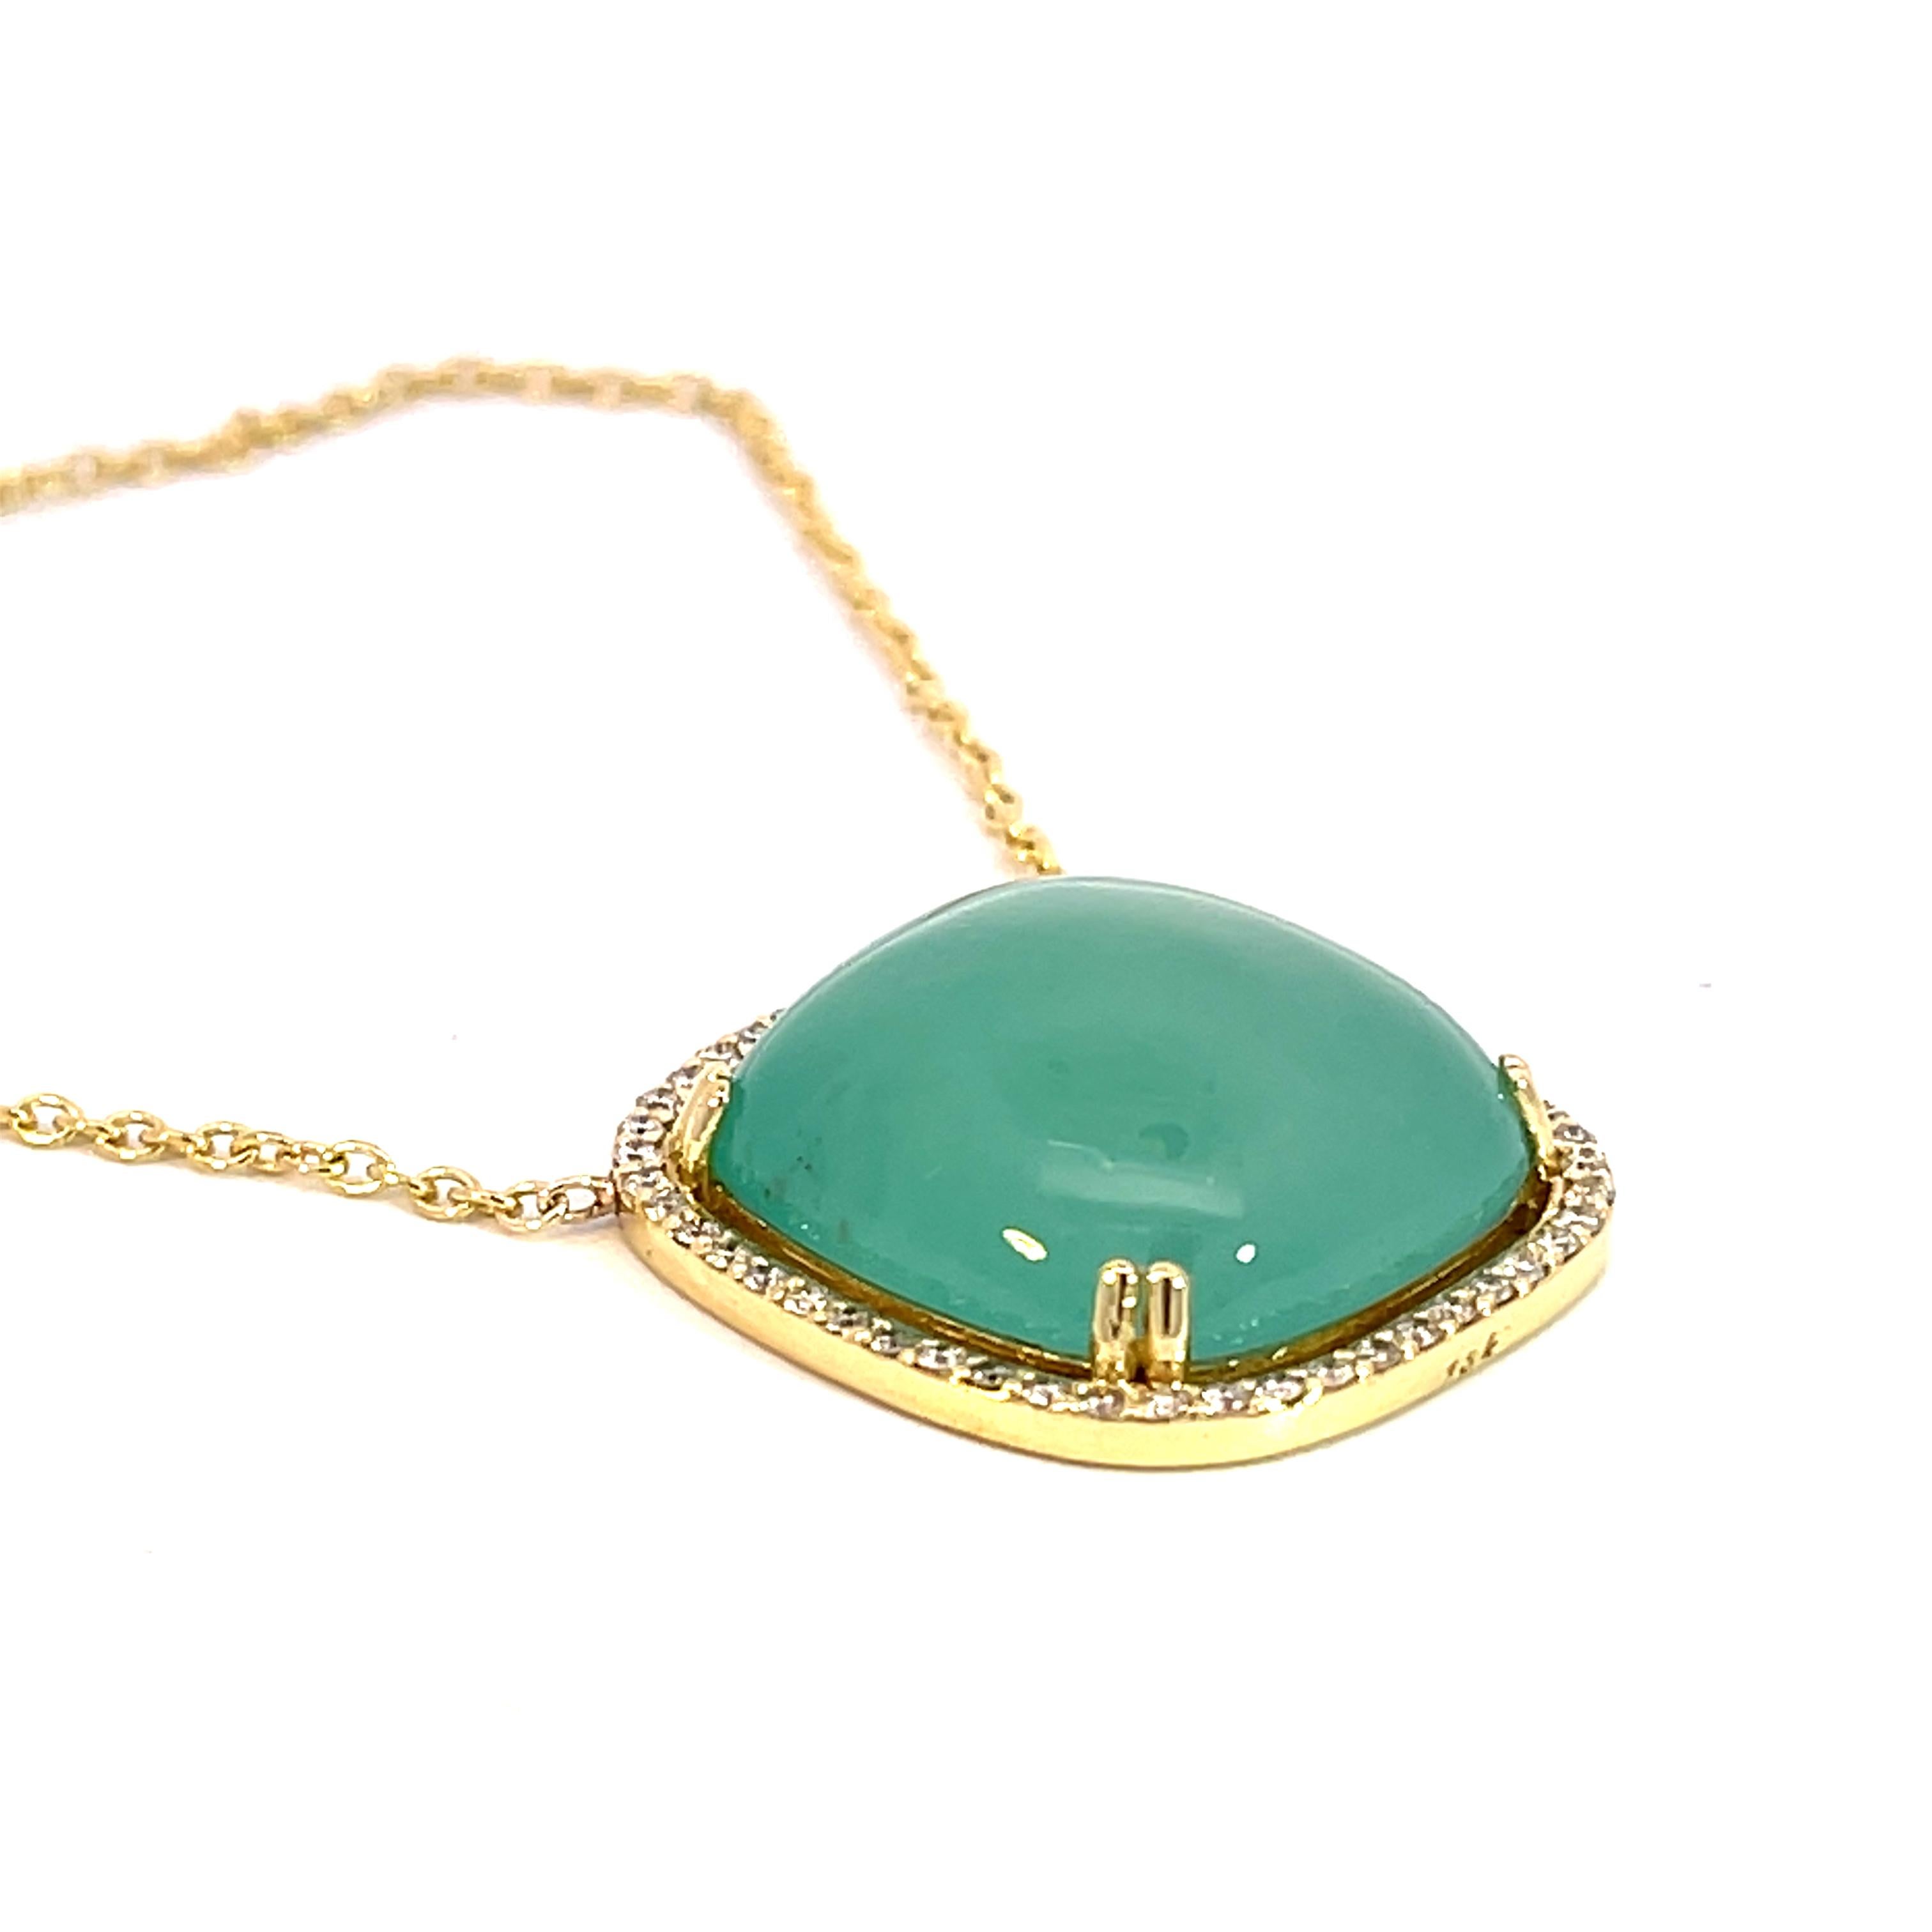 An 18k yellow gold pendant featuring a double prong set African cushion cut cabochon sea foam chalcedony (16.60 carats) which is accented by a halo of white diamonds 0.30 total carat weight on a 1.5mm 14k yellow gold cable chain. This necklace was